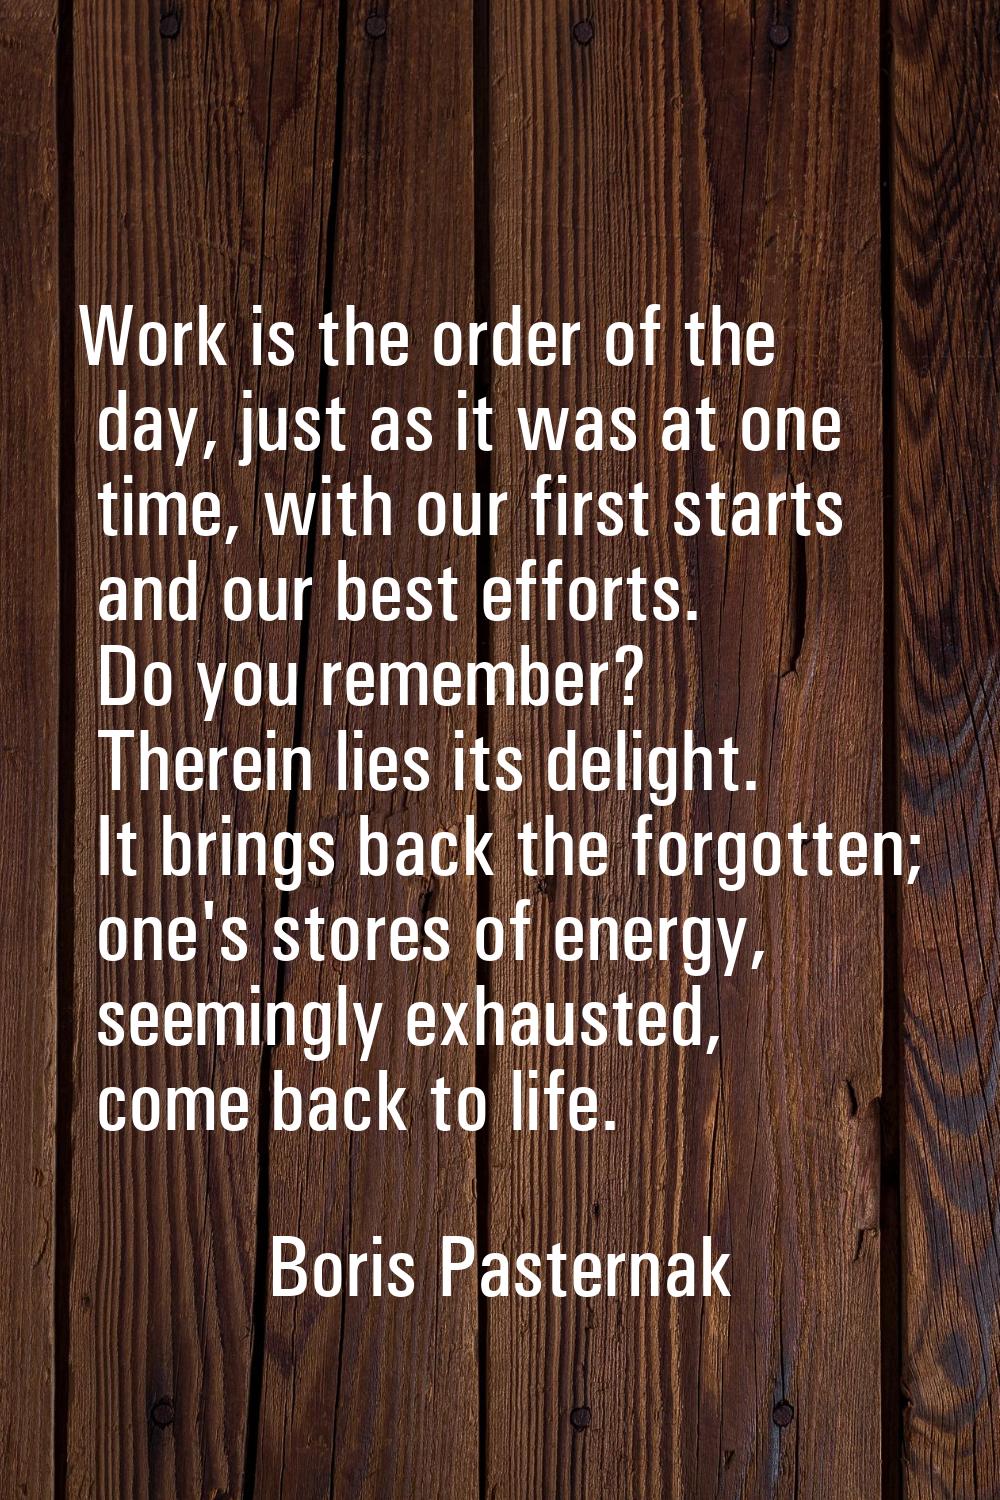 Work is the order of the day, just as it was at one time, with our first starts and our best effort